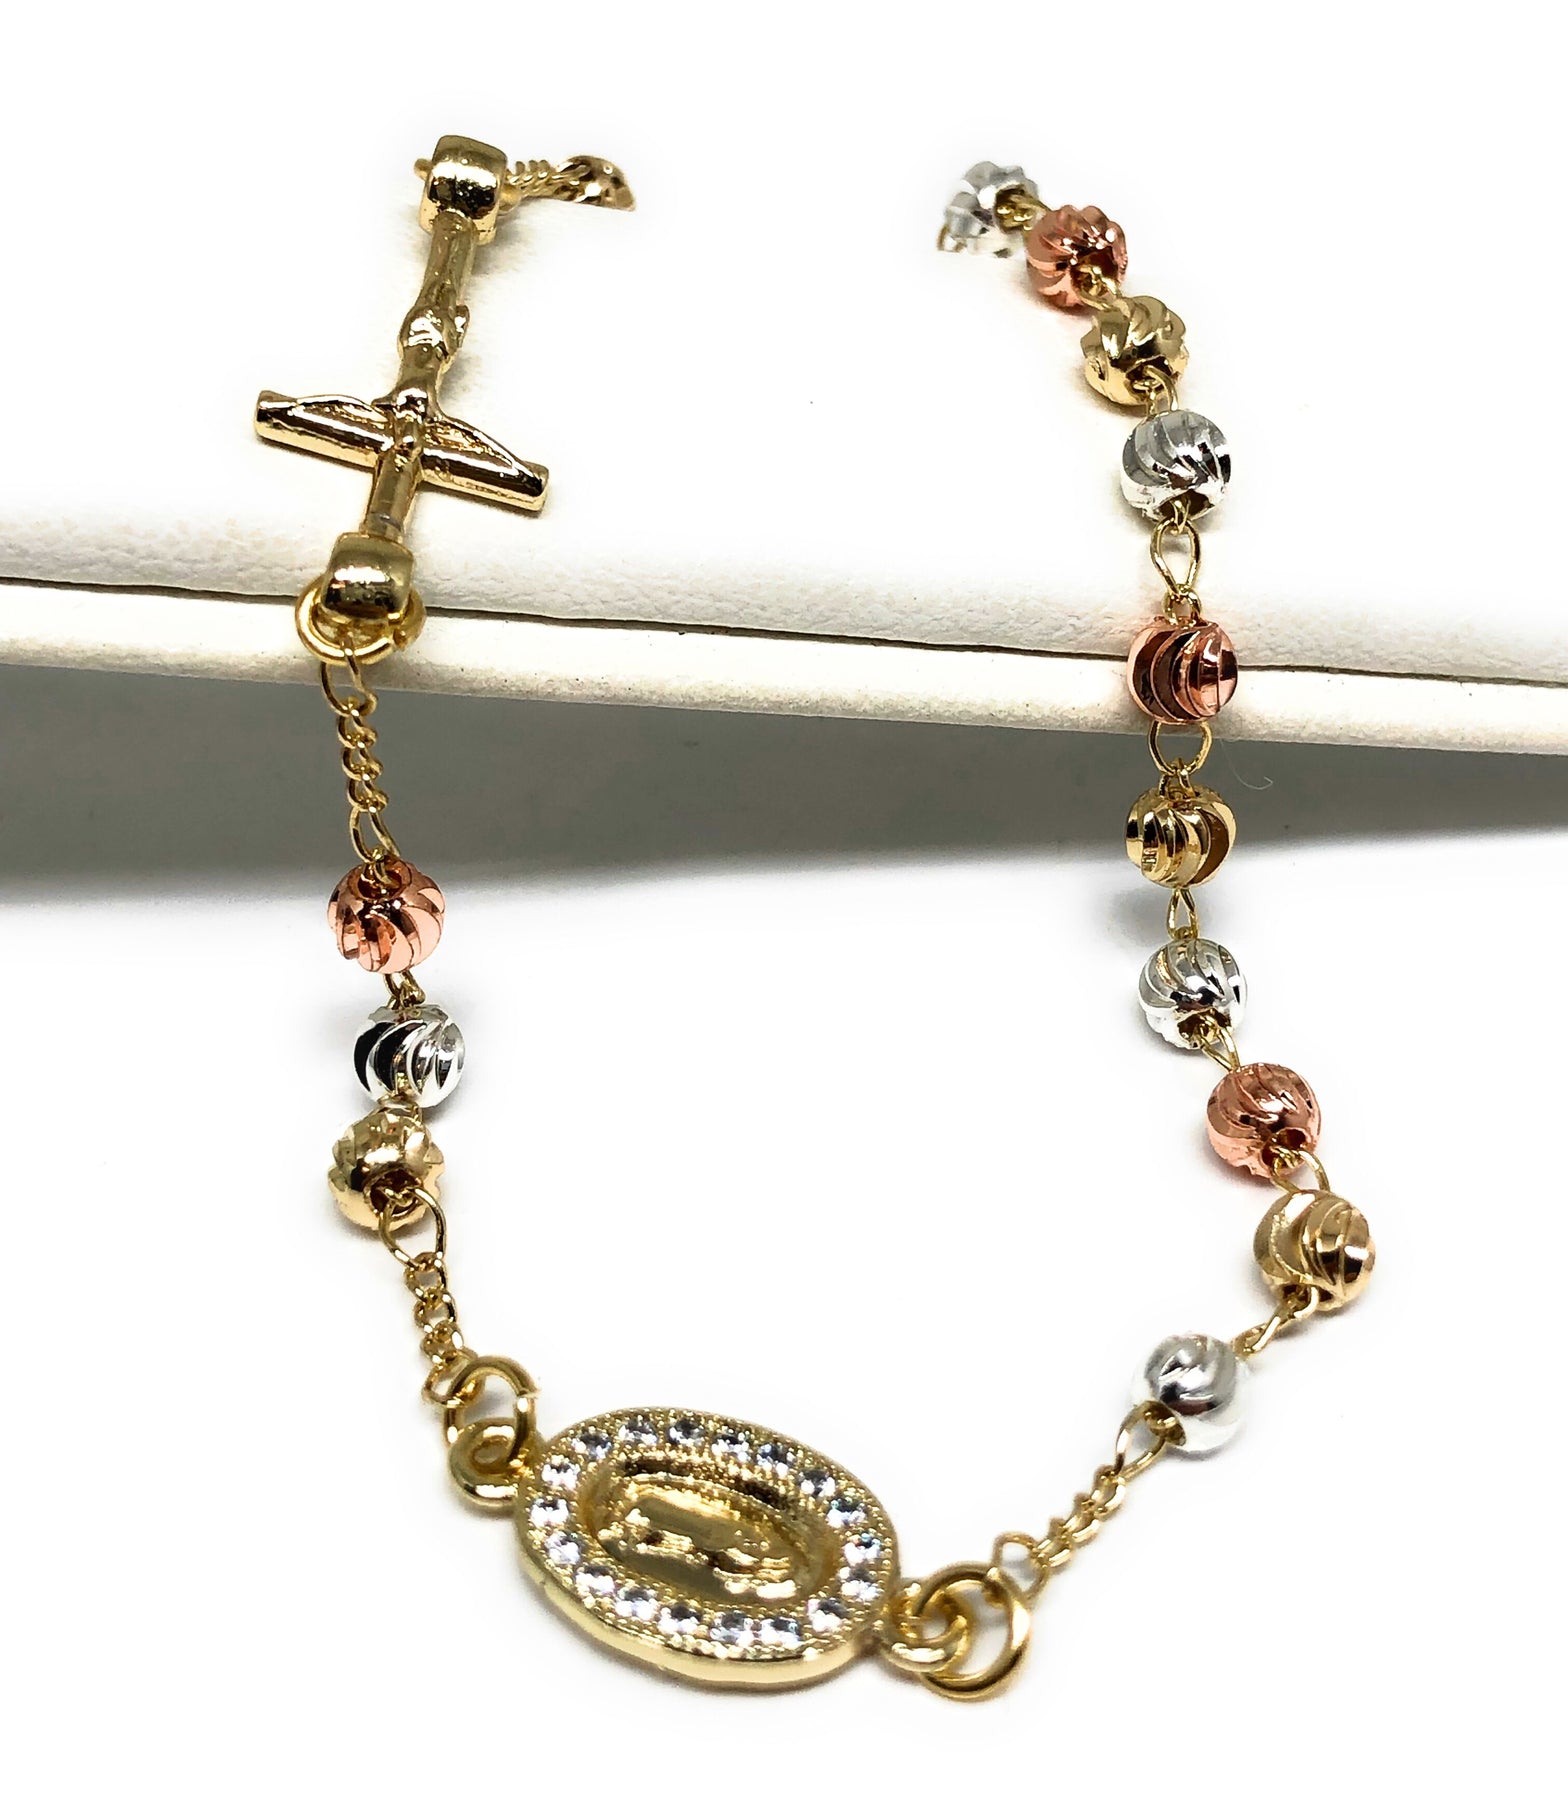  Virgin Mary Chain Gold Bracelet For Women Girl,La Virgen De  Guadalupe Bracelets,Our Lady Of Guadalupe Charms Pulseras De Mujer,Mexican  Jewelry Gift,Brazaletes Para Mujer: Clothing, Shoes & Jewelry